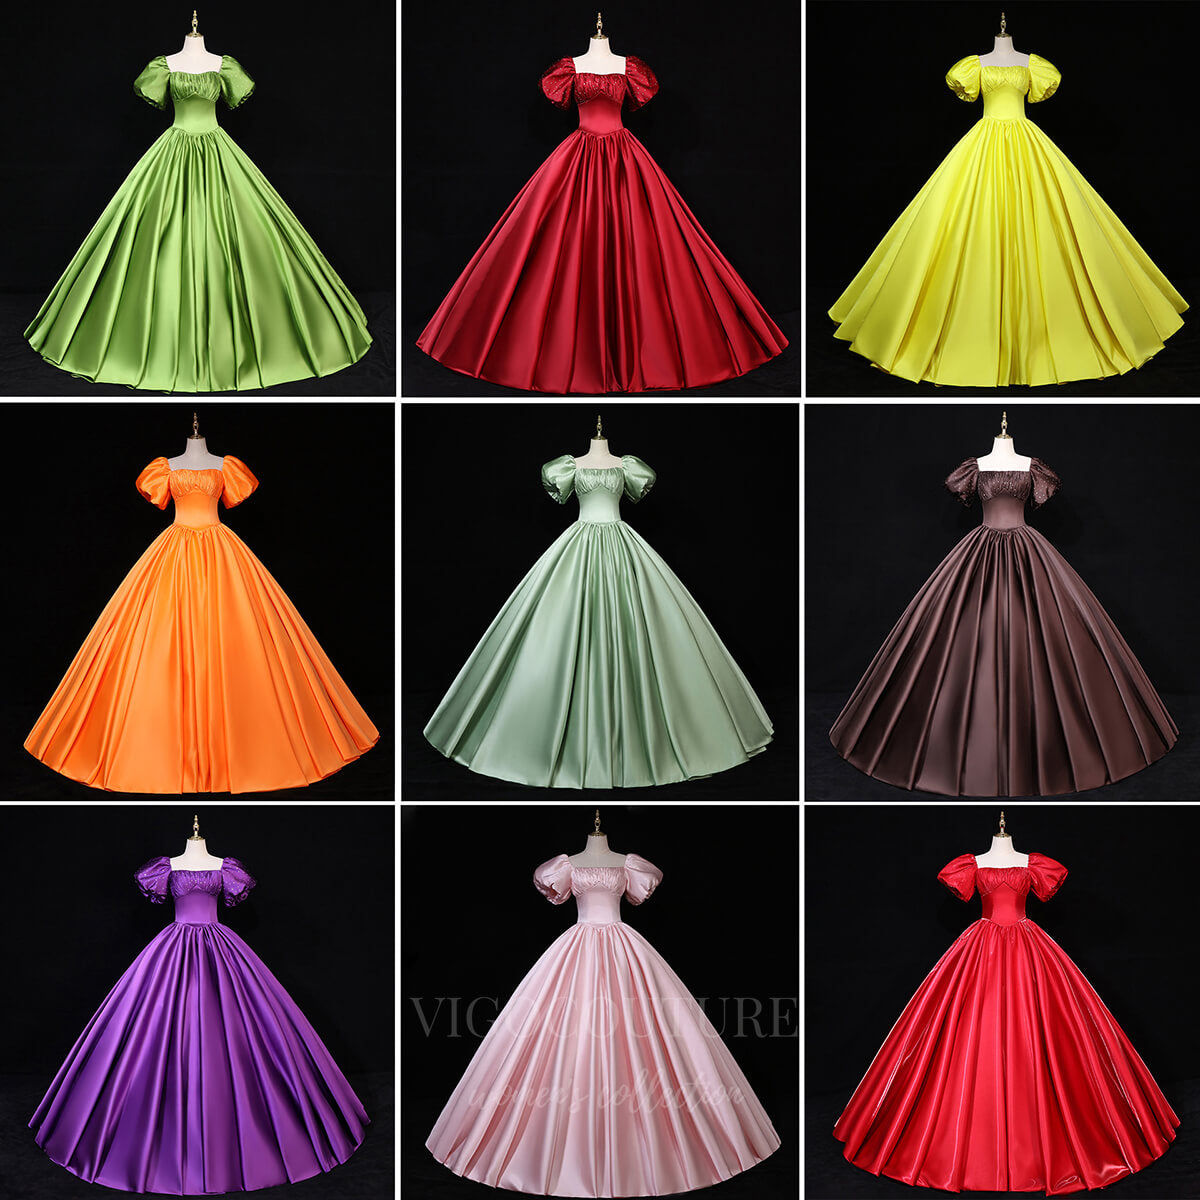 Different Types of Gowns - 7 Types of Gowns | Fashionstylevogue.com